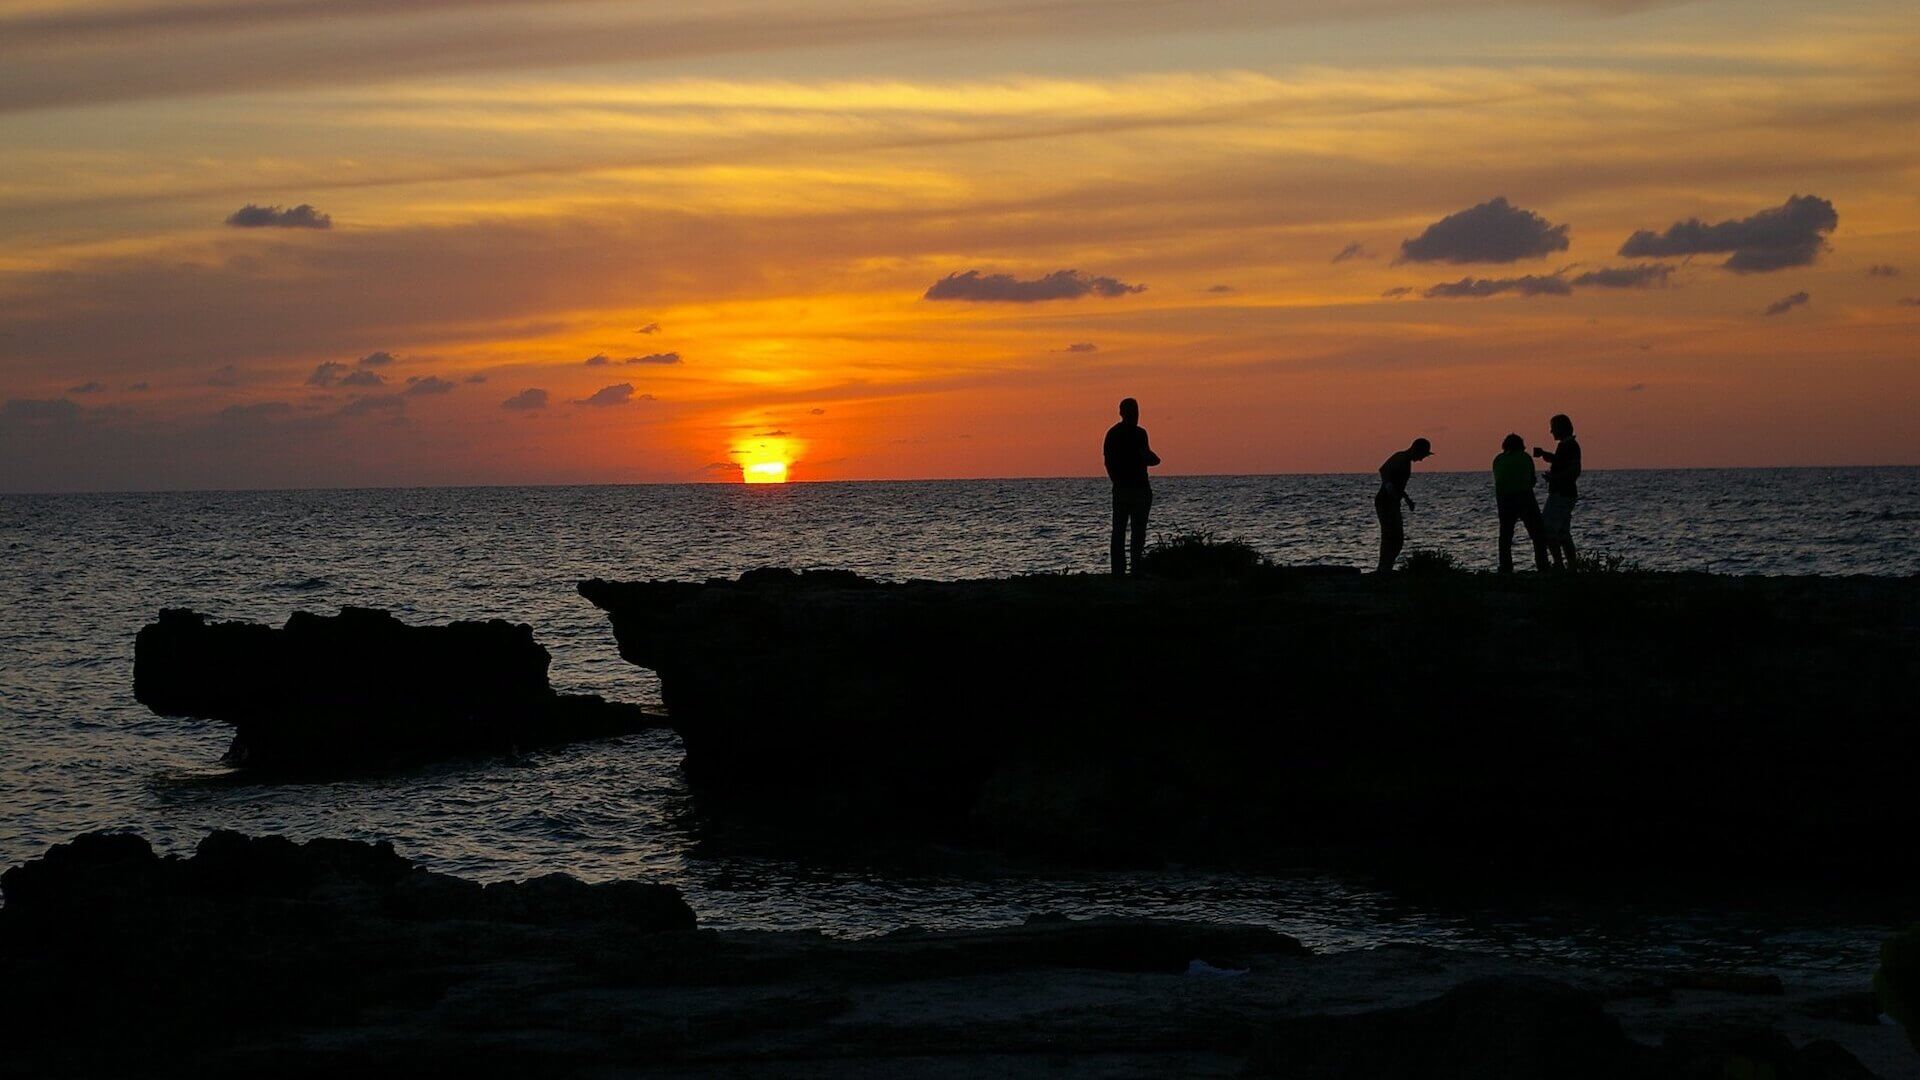 A group of people standing on a rocky beach at sunset.